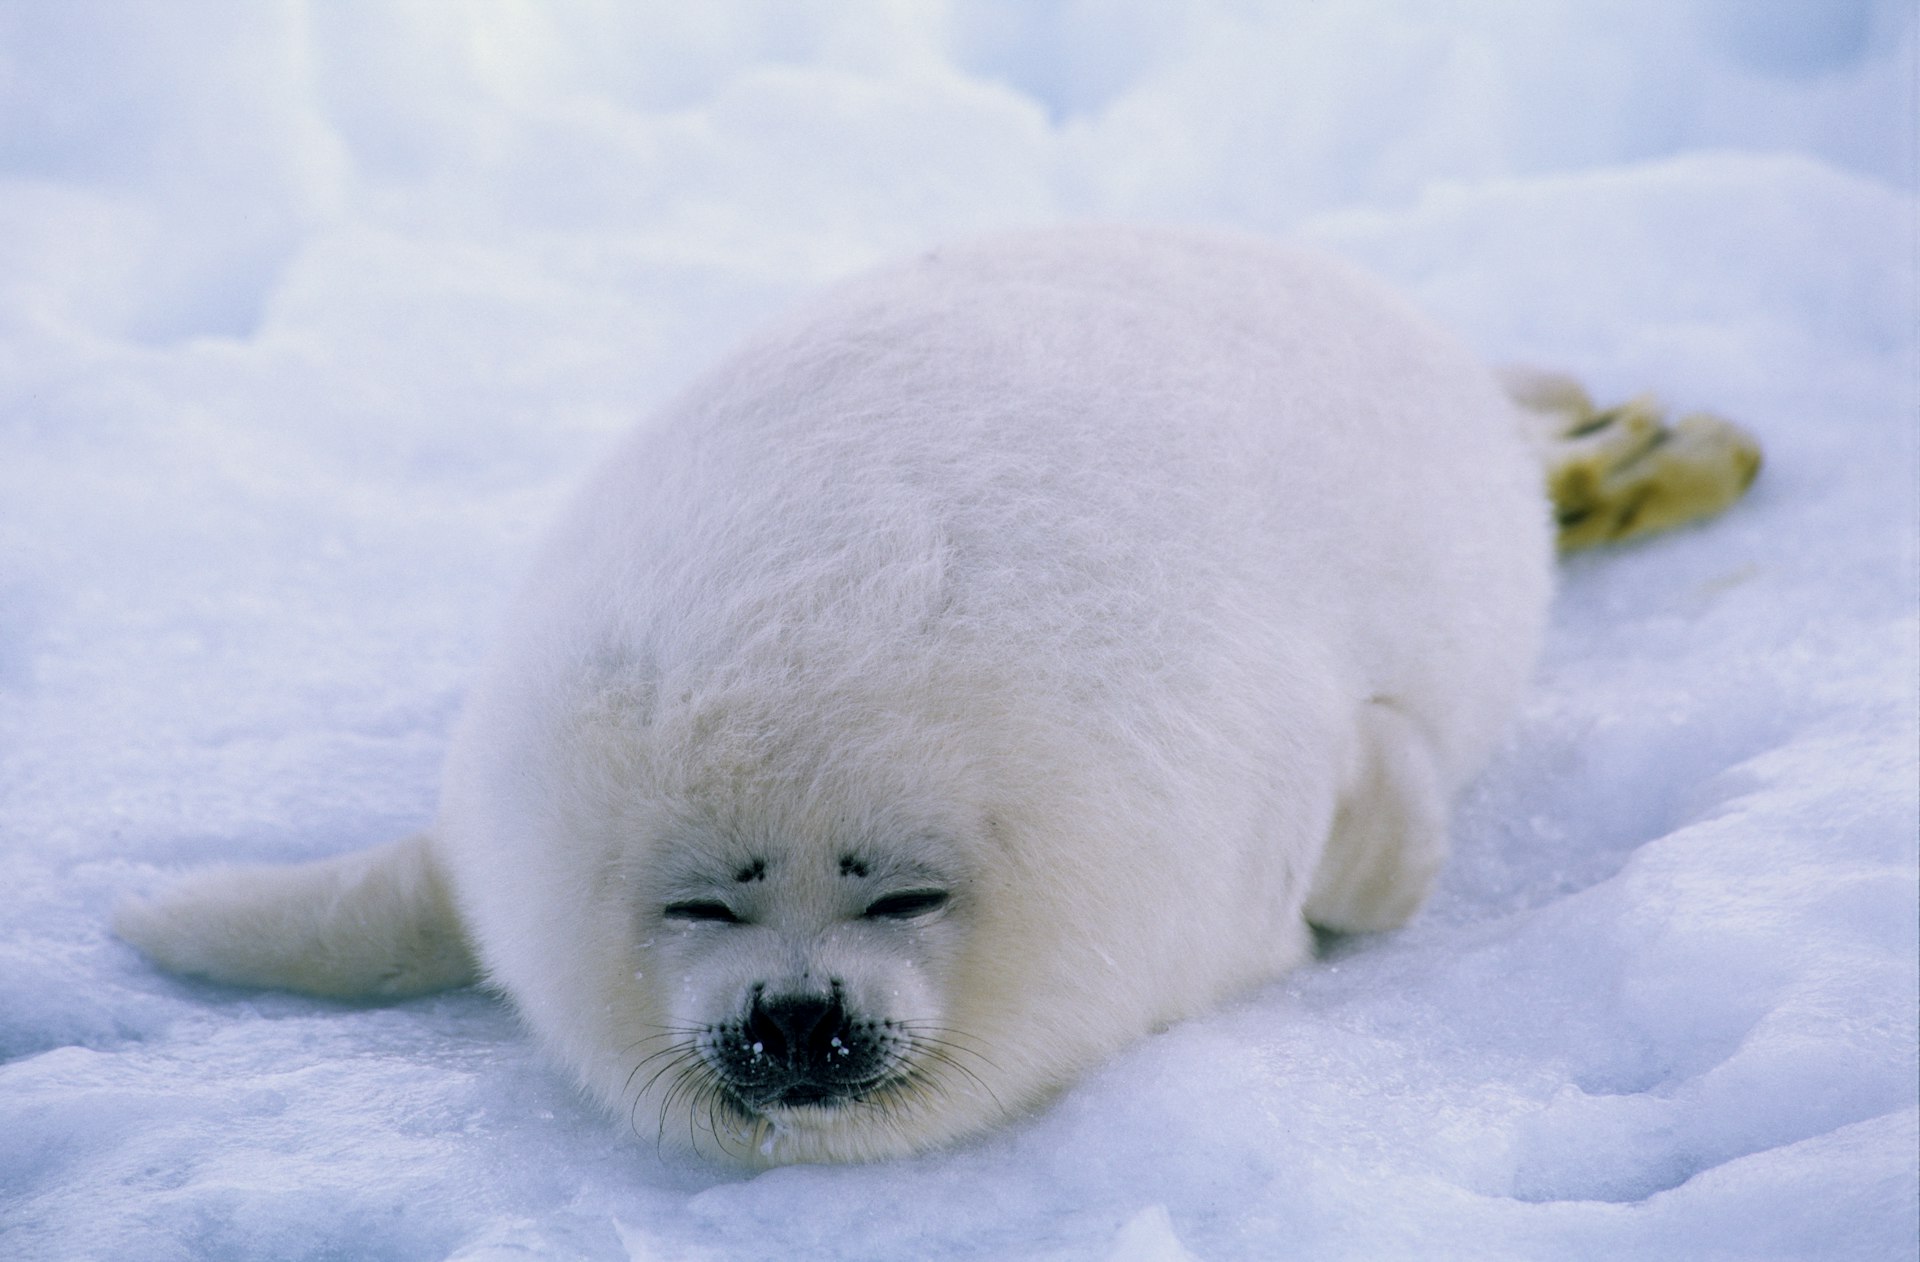 Harp Seal in the snow (adorable)